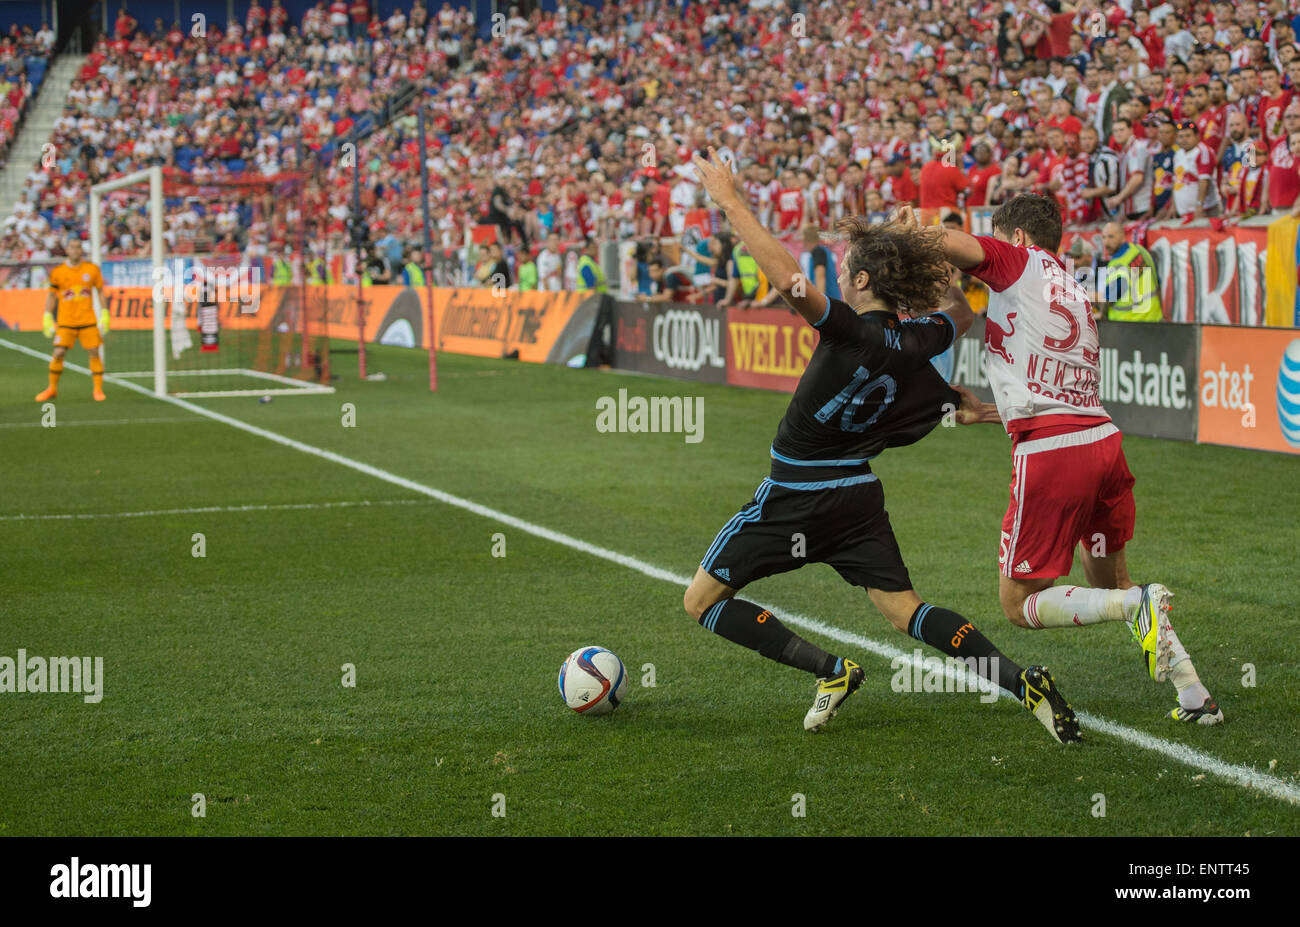 Harrison, New Jersey, USA. 10th May, 2015. NYCFC's MIX DISKERUD and and Red Bulls' DAMIEN PERRINELLE fight for the ball in the 1st half, New York Red Bulls vs. New York City FC, Red Bull Arena, Sunday May 10, 2015. This is the inaugural derby between clubs. © Bryan Smith/ZUMA Wire/Alamy Live News Stock Photo